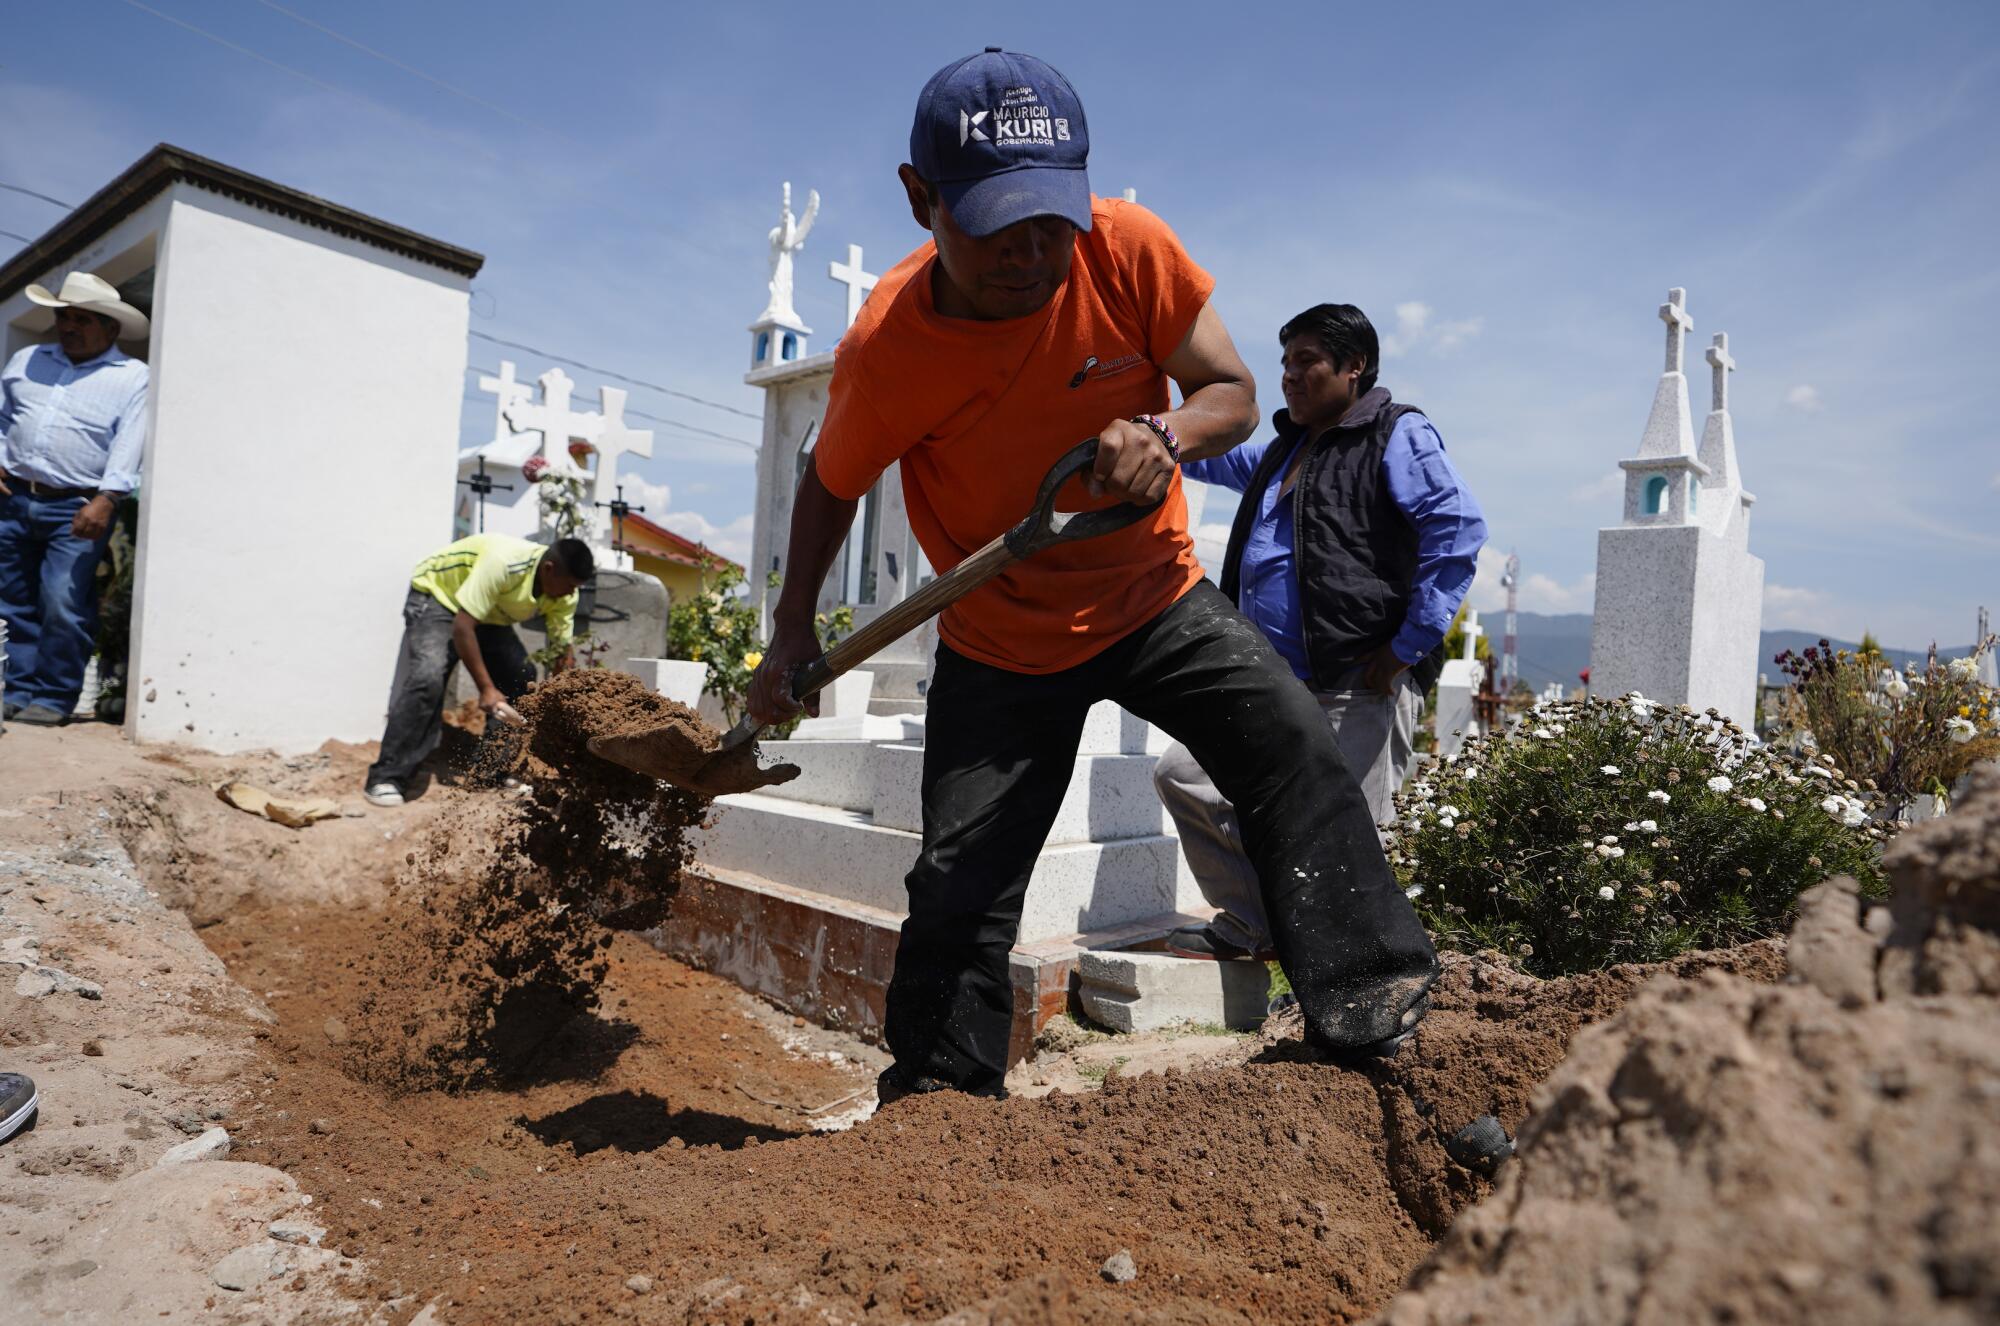 A grounds keeper shovels sand over the grave of Maria Eugenia Chavez Segovia at Tultepec Cemetery.